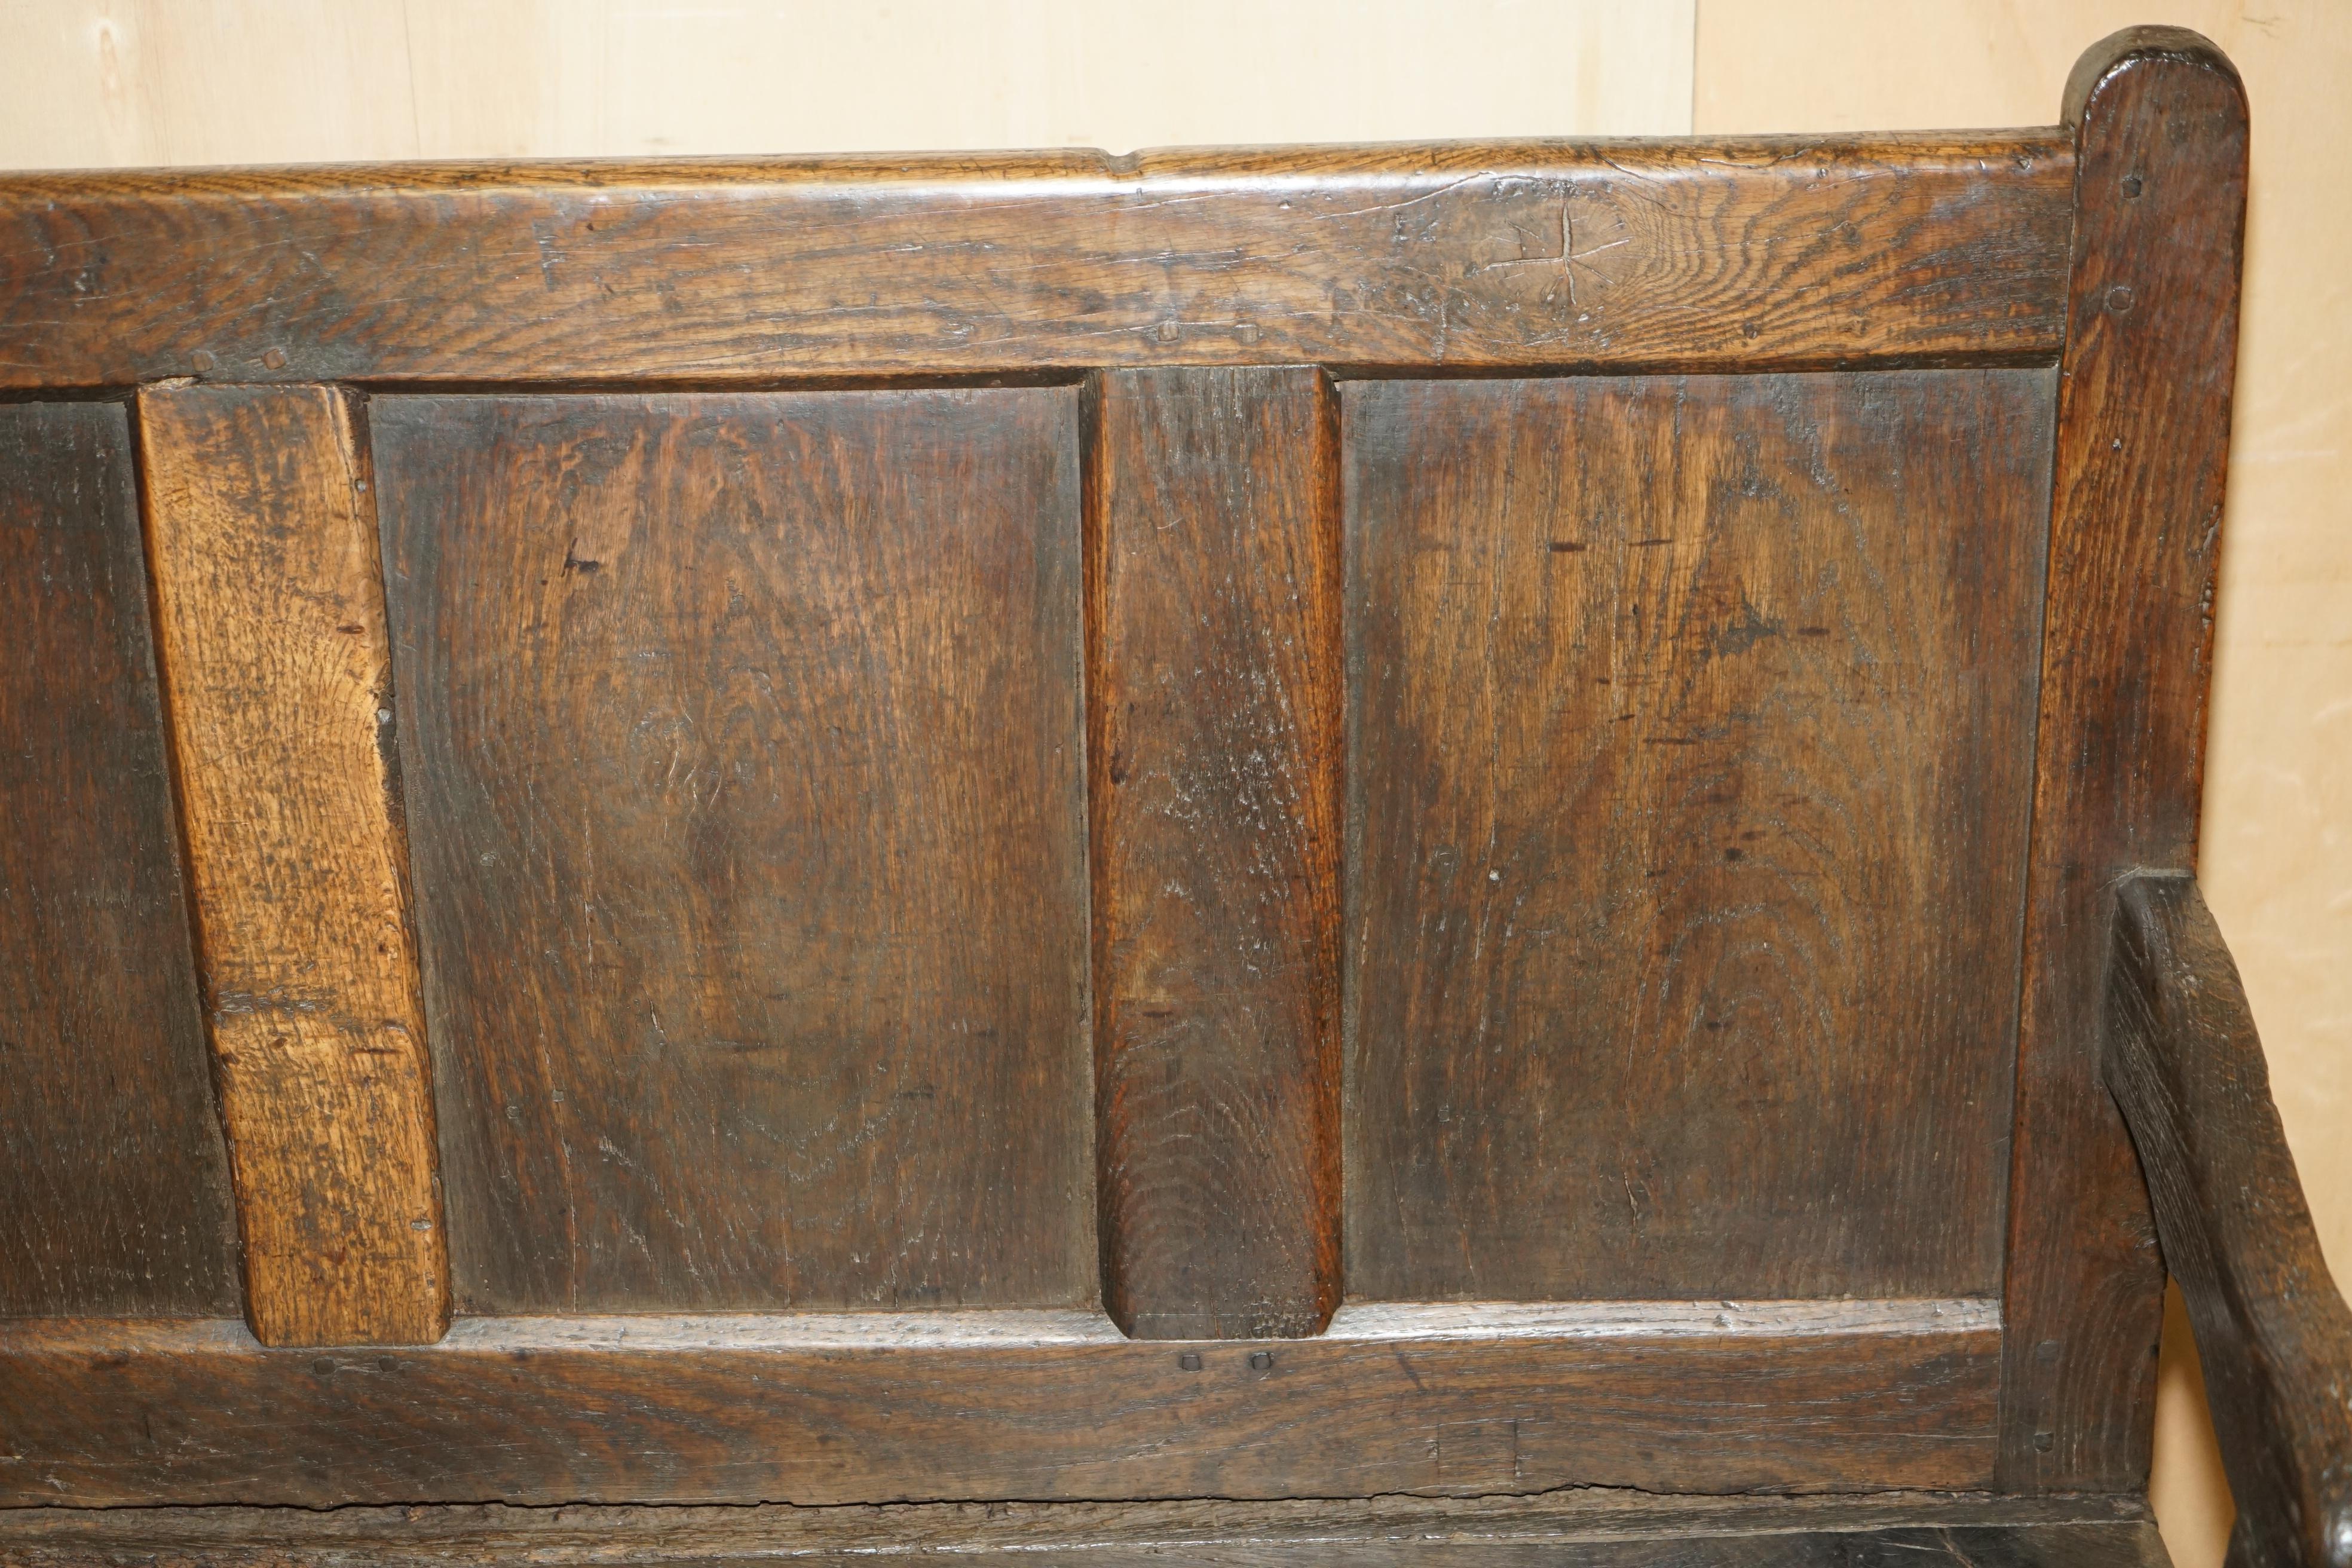 STUNNiNG 17TH CENTURY ANGLESEY WALES SETTLE BENCH LOVELY HALLWAY TAVERN SEATING For Sale 2